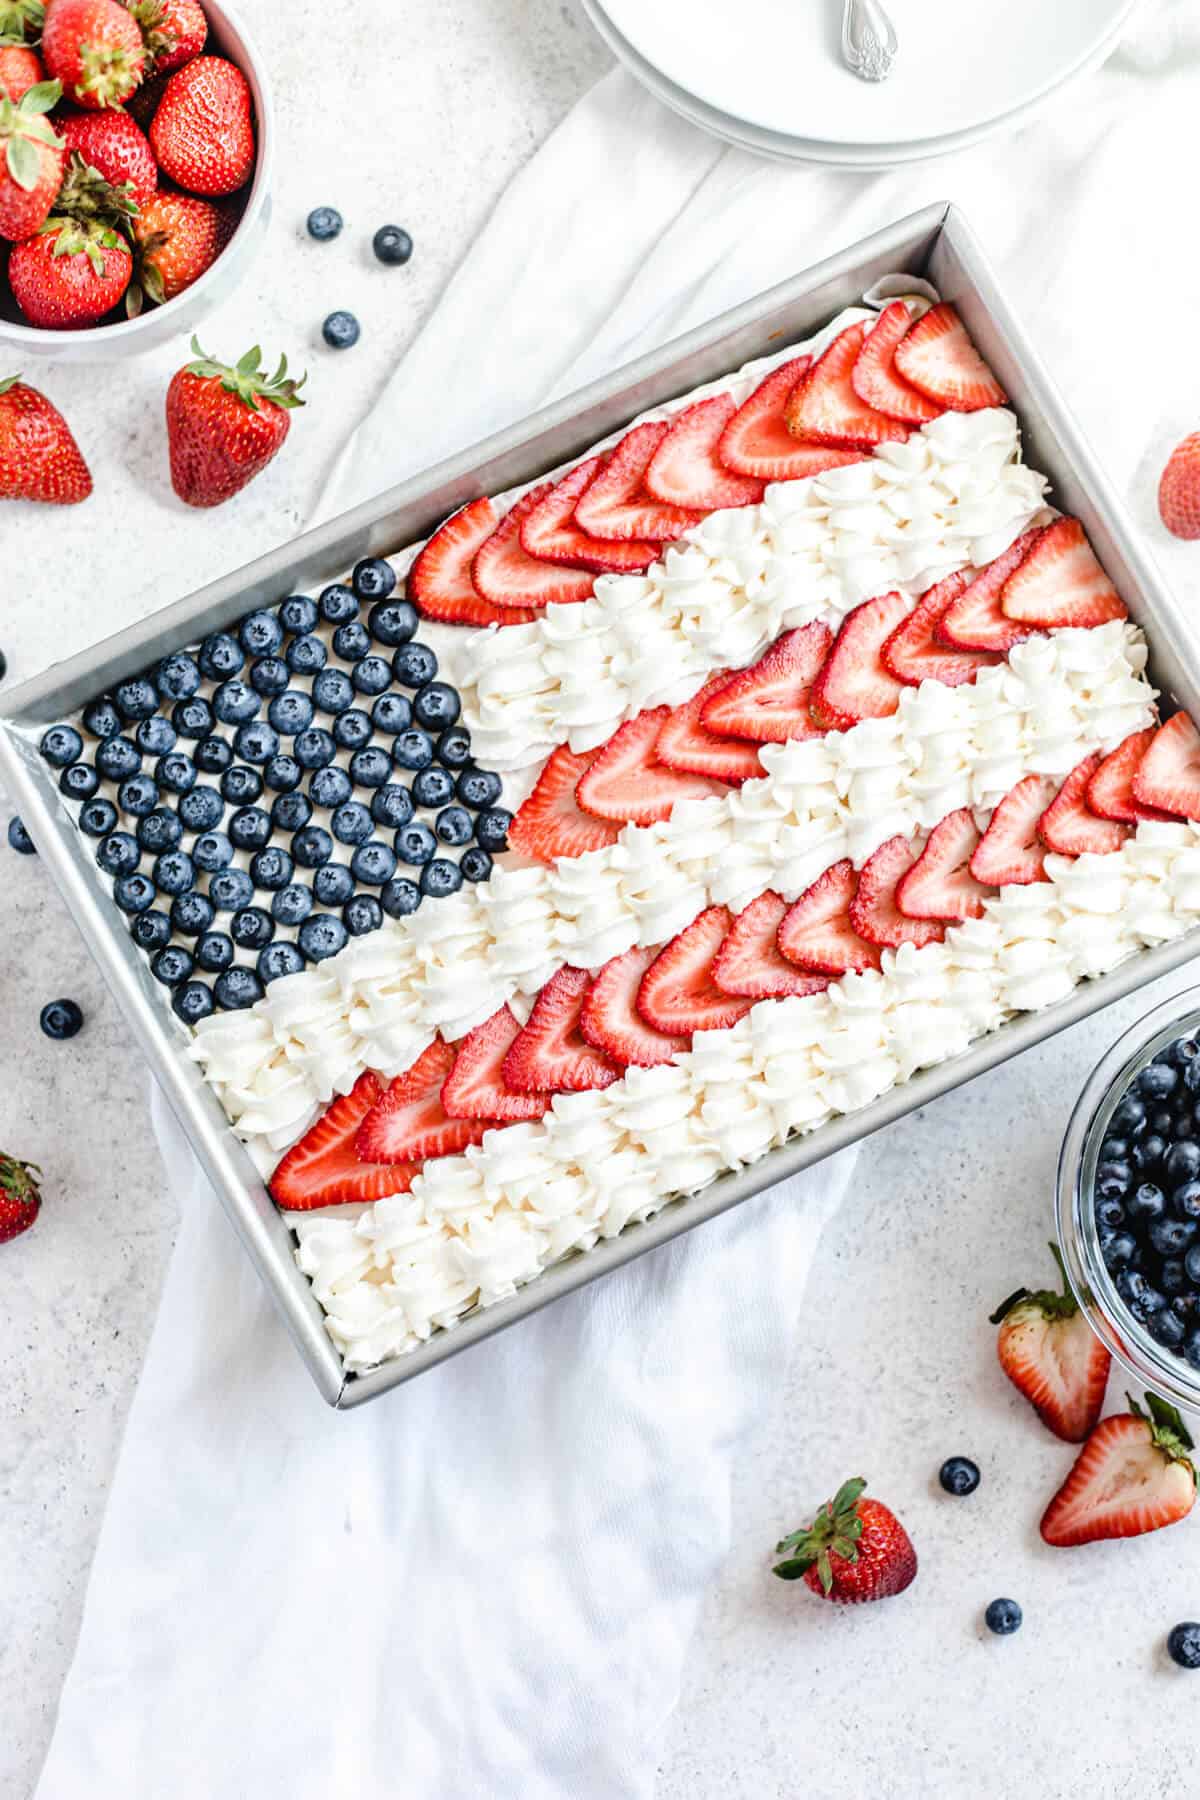 cheesecake decorated with whipped cream, sliced strawberries and blueberries to look like the American flag